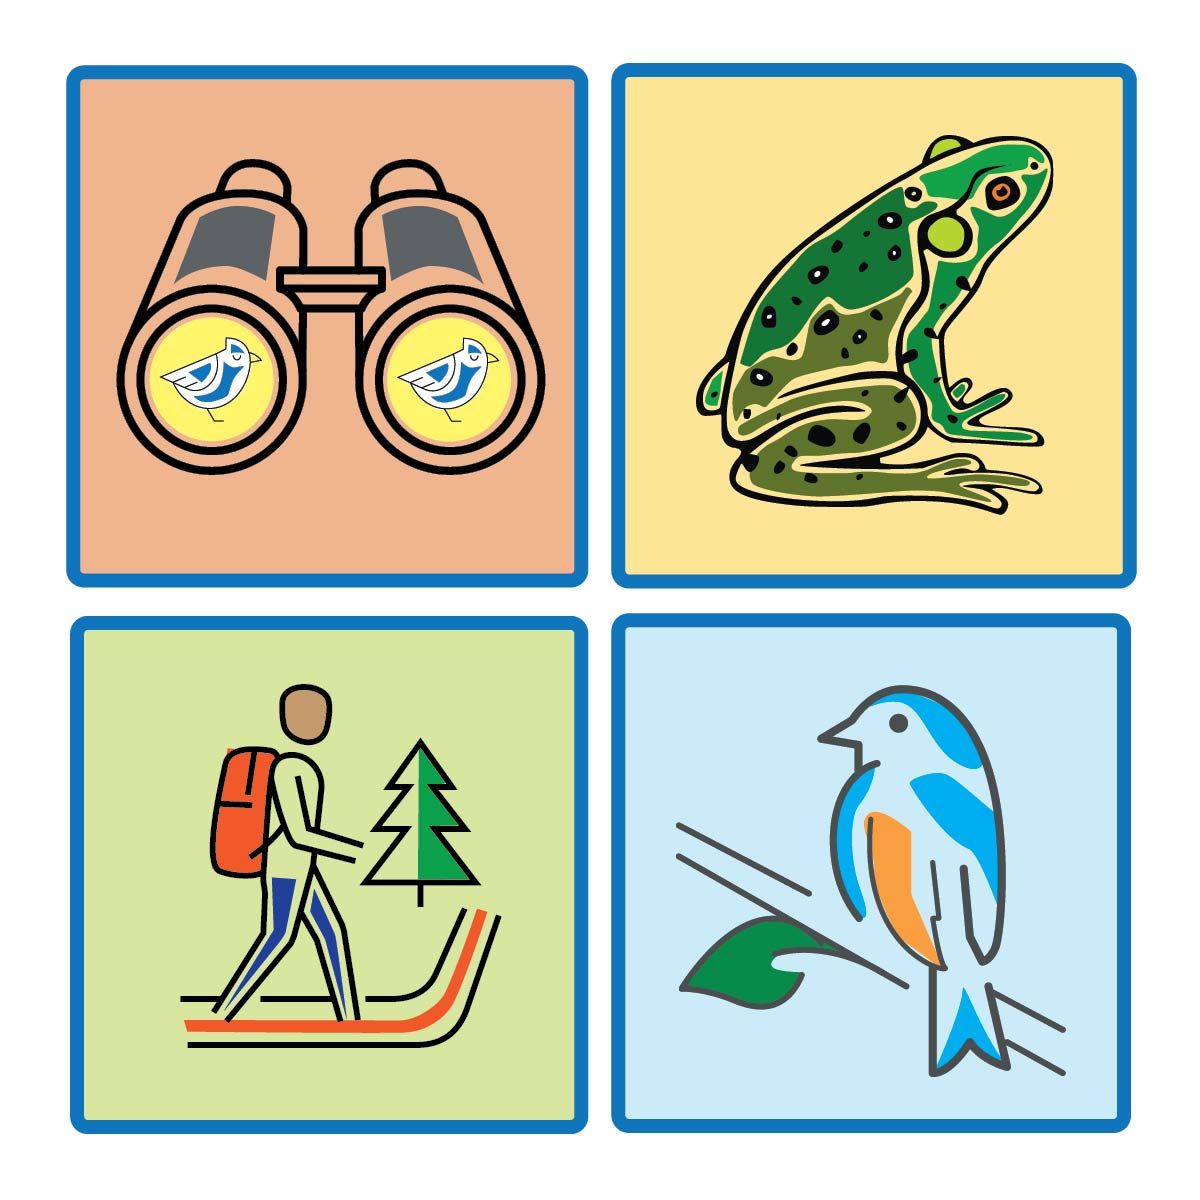 Grid of four colorful icons, featuring a pair of binoculars, a frog, a person hiking, and a blue colored bird. 